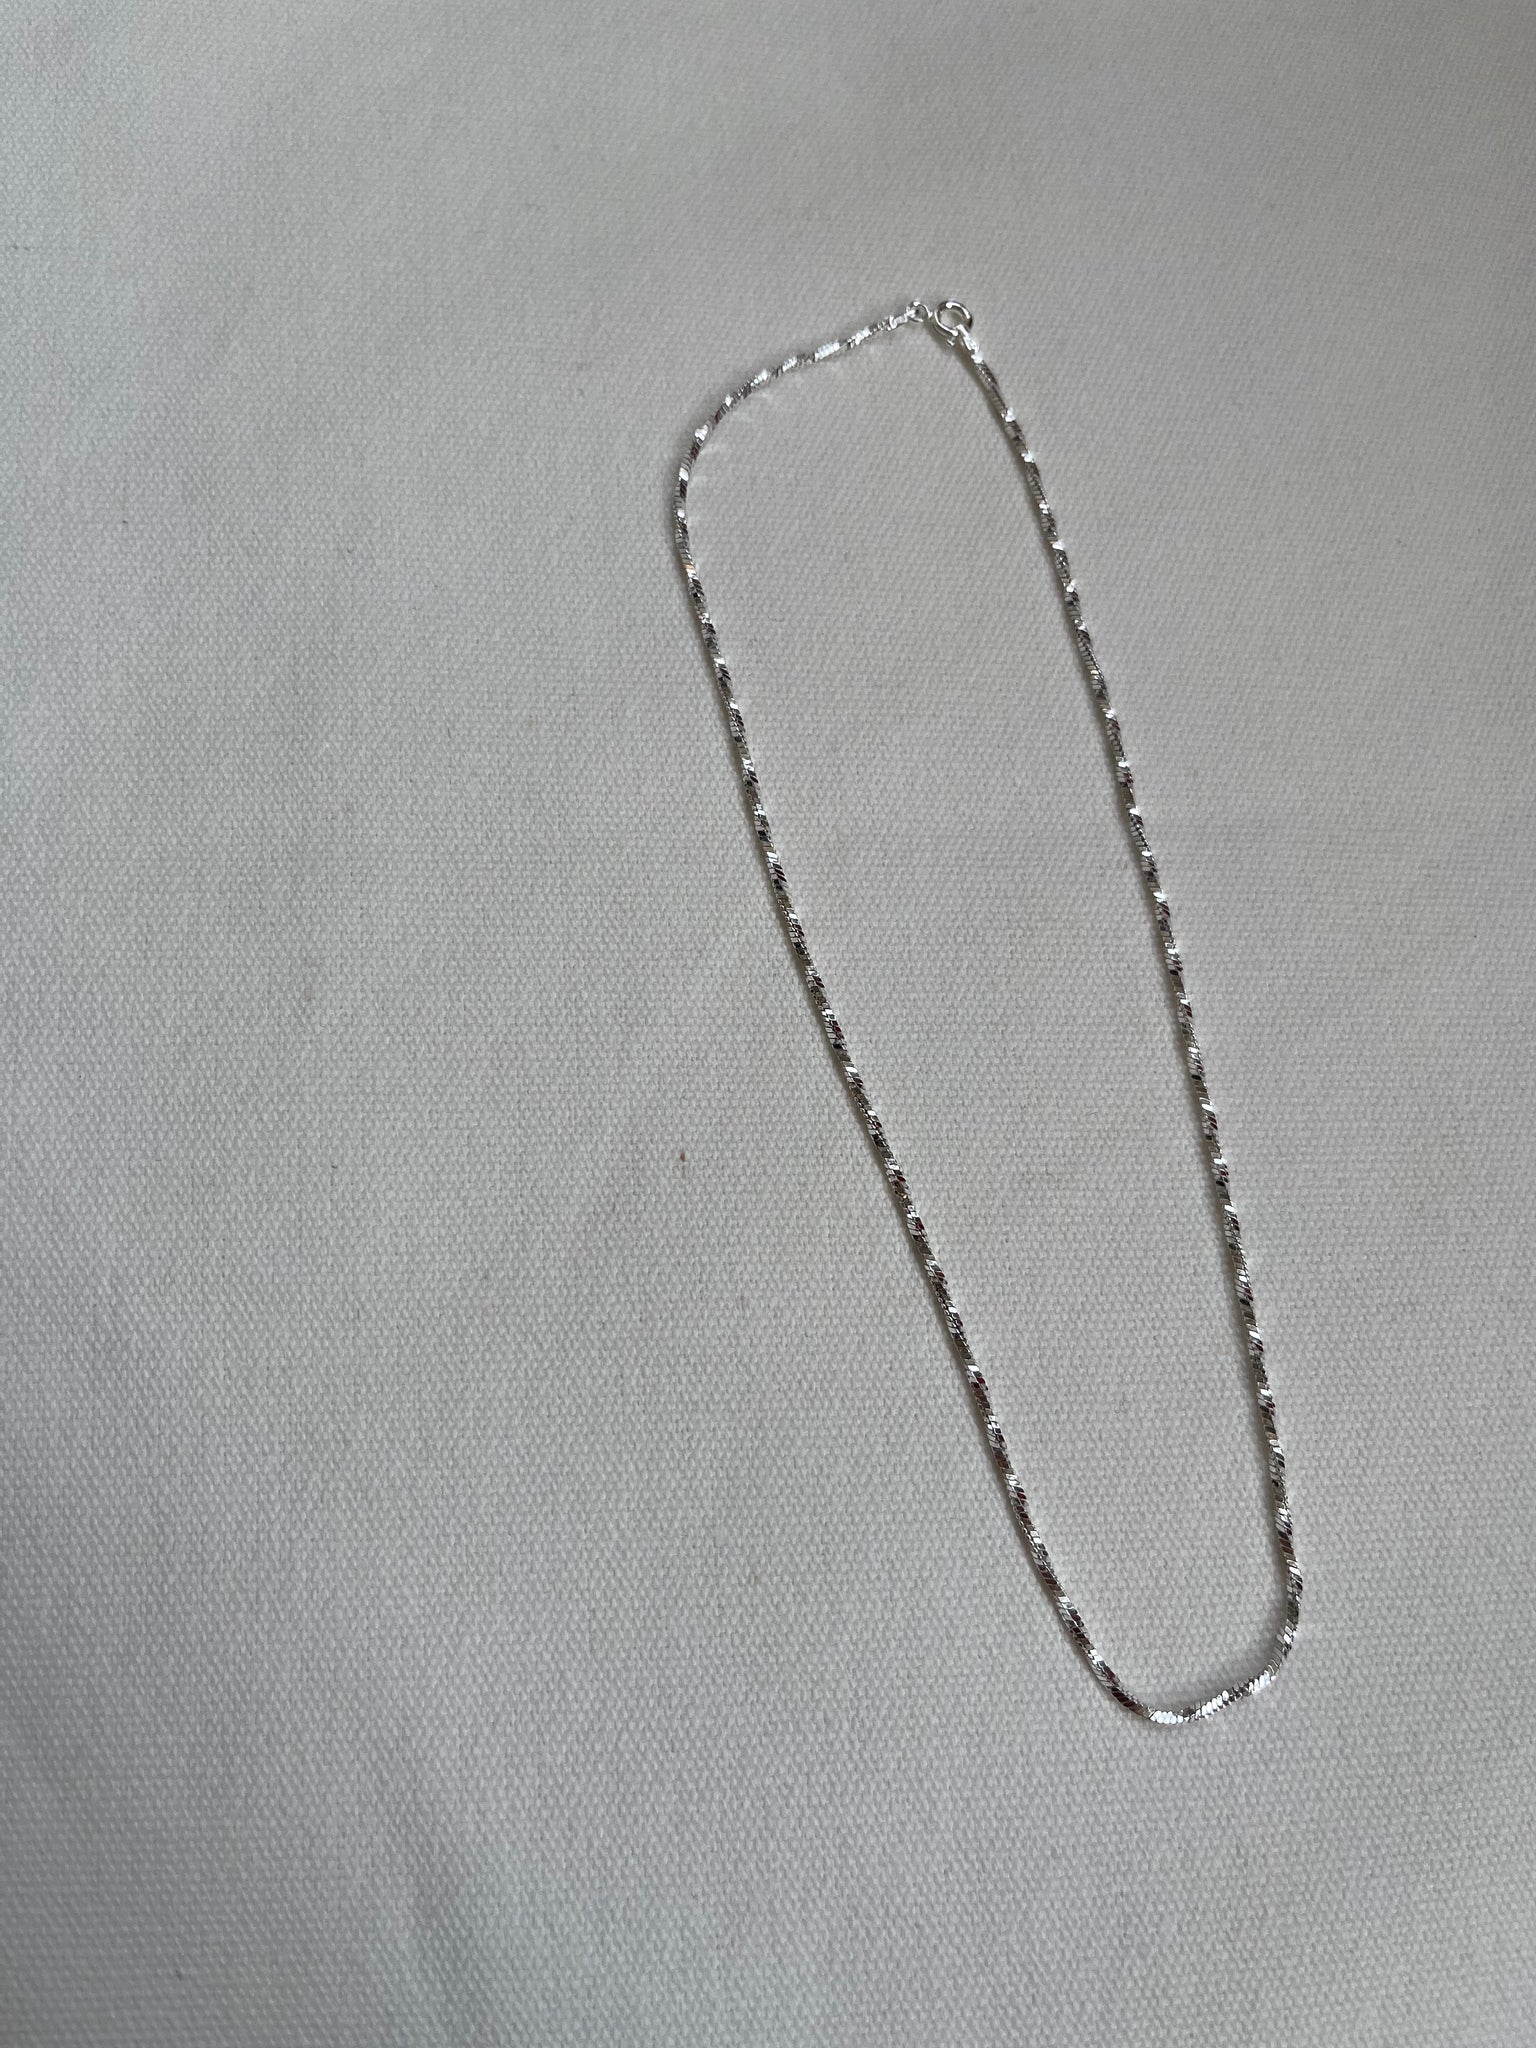 925 Silver Twisted Snake Necklace